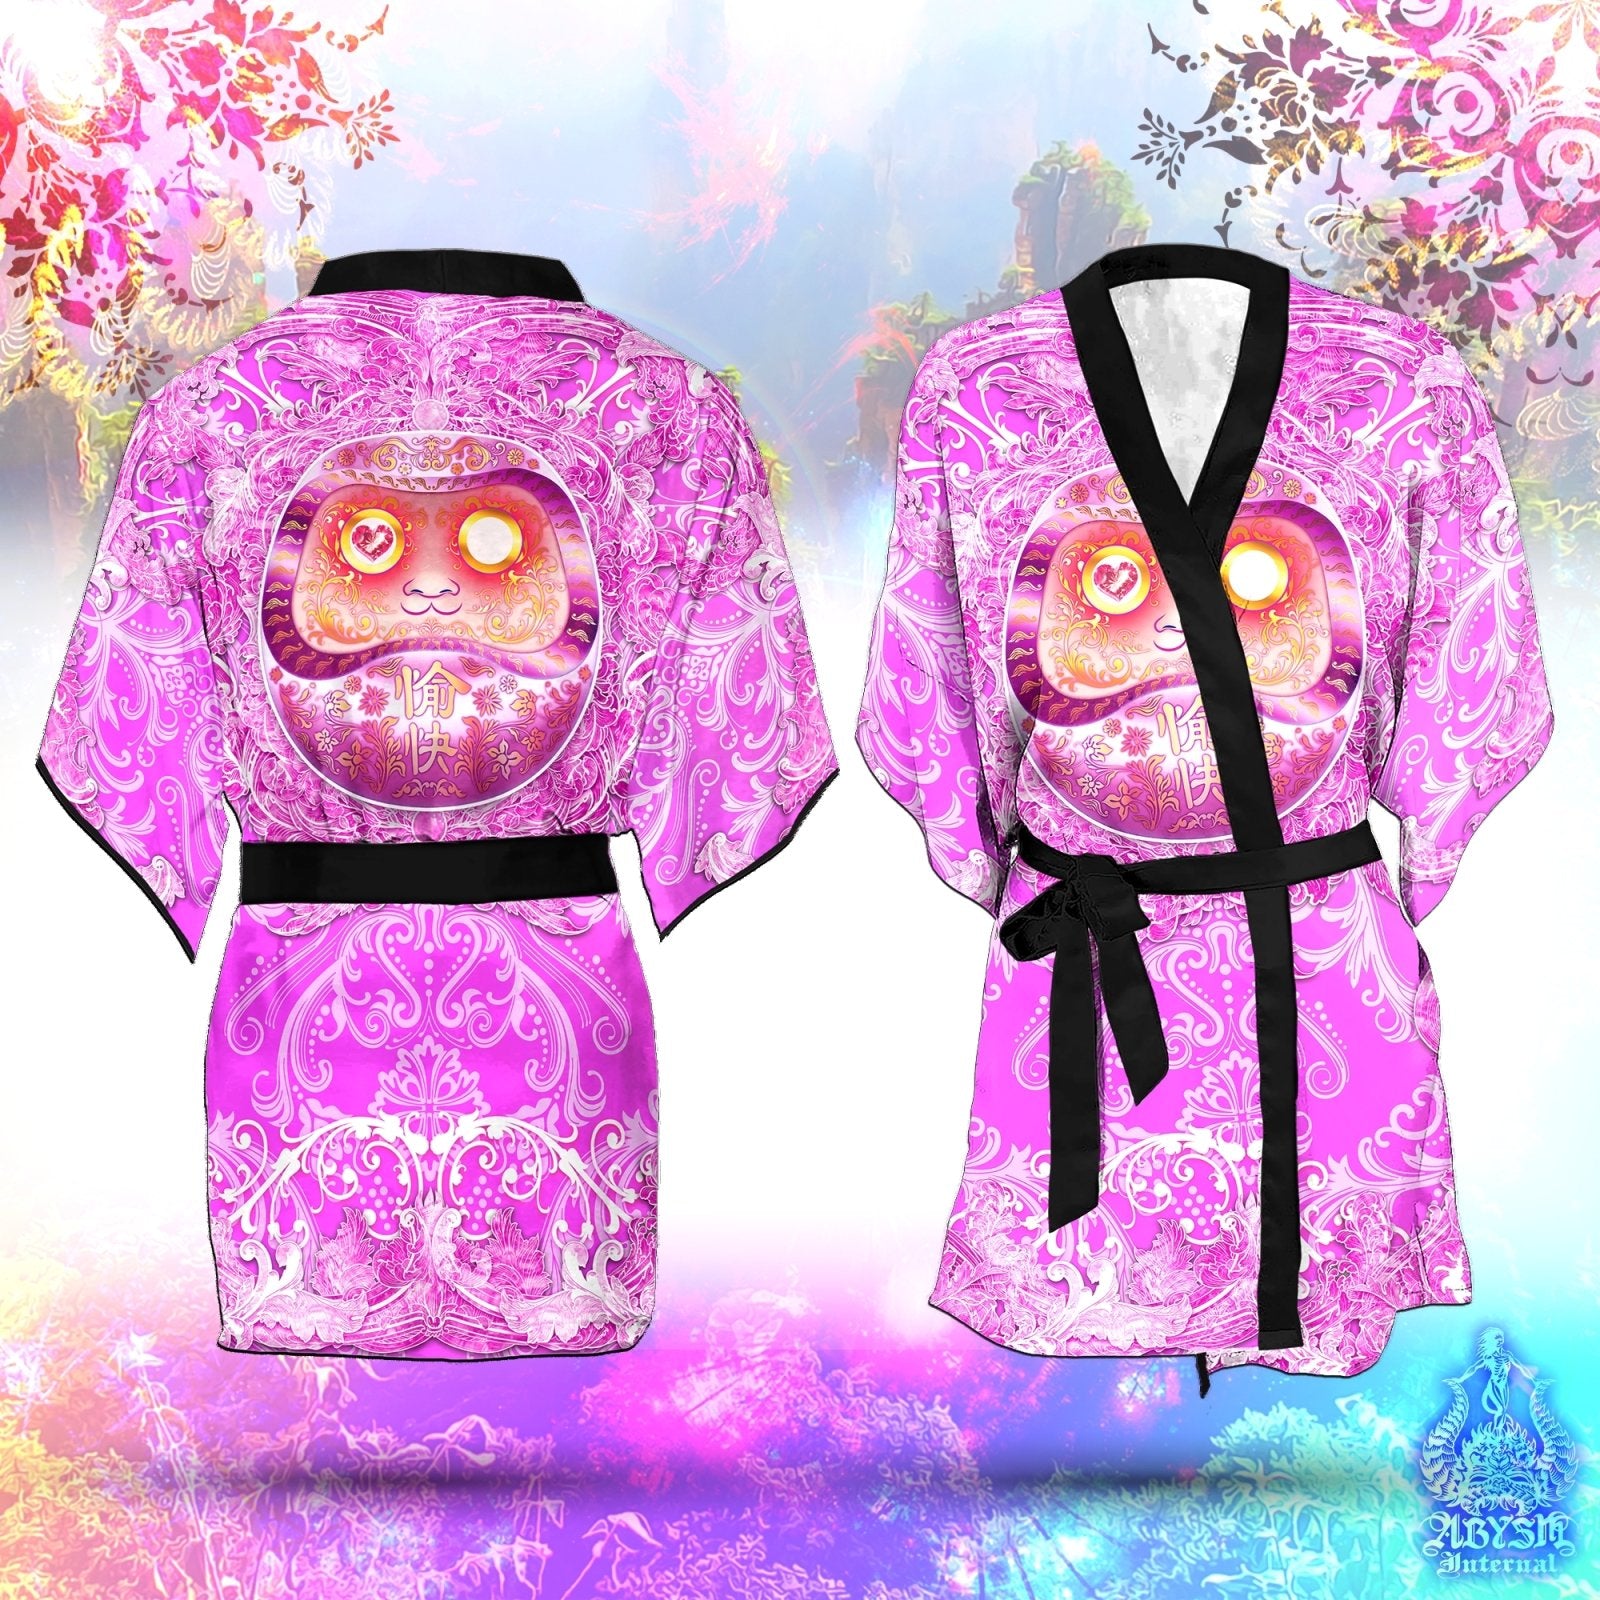 Daruma Cover Up, Beach Rave Outfit, Party Kimono, Japanese Summer Festival Robe, Indie and Alternative Clothing, Unisex - Kawaii - Abysm Internal